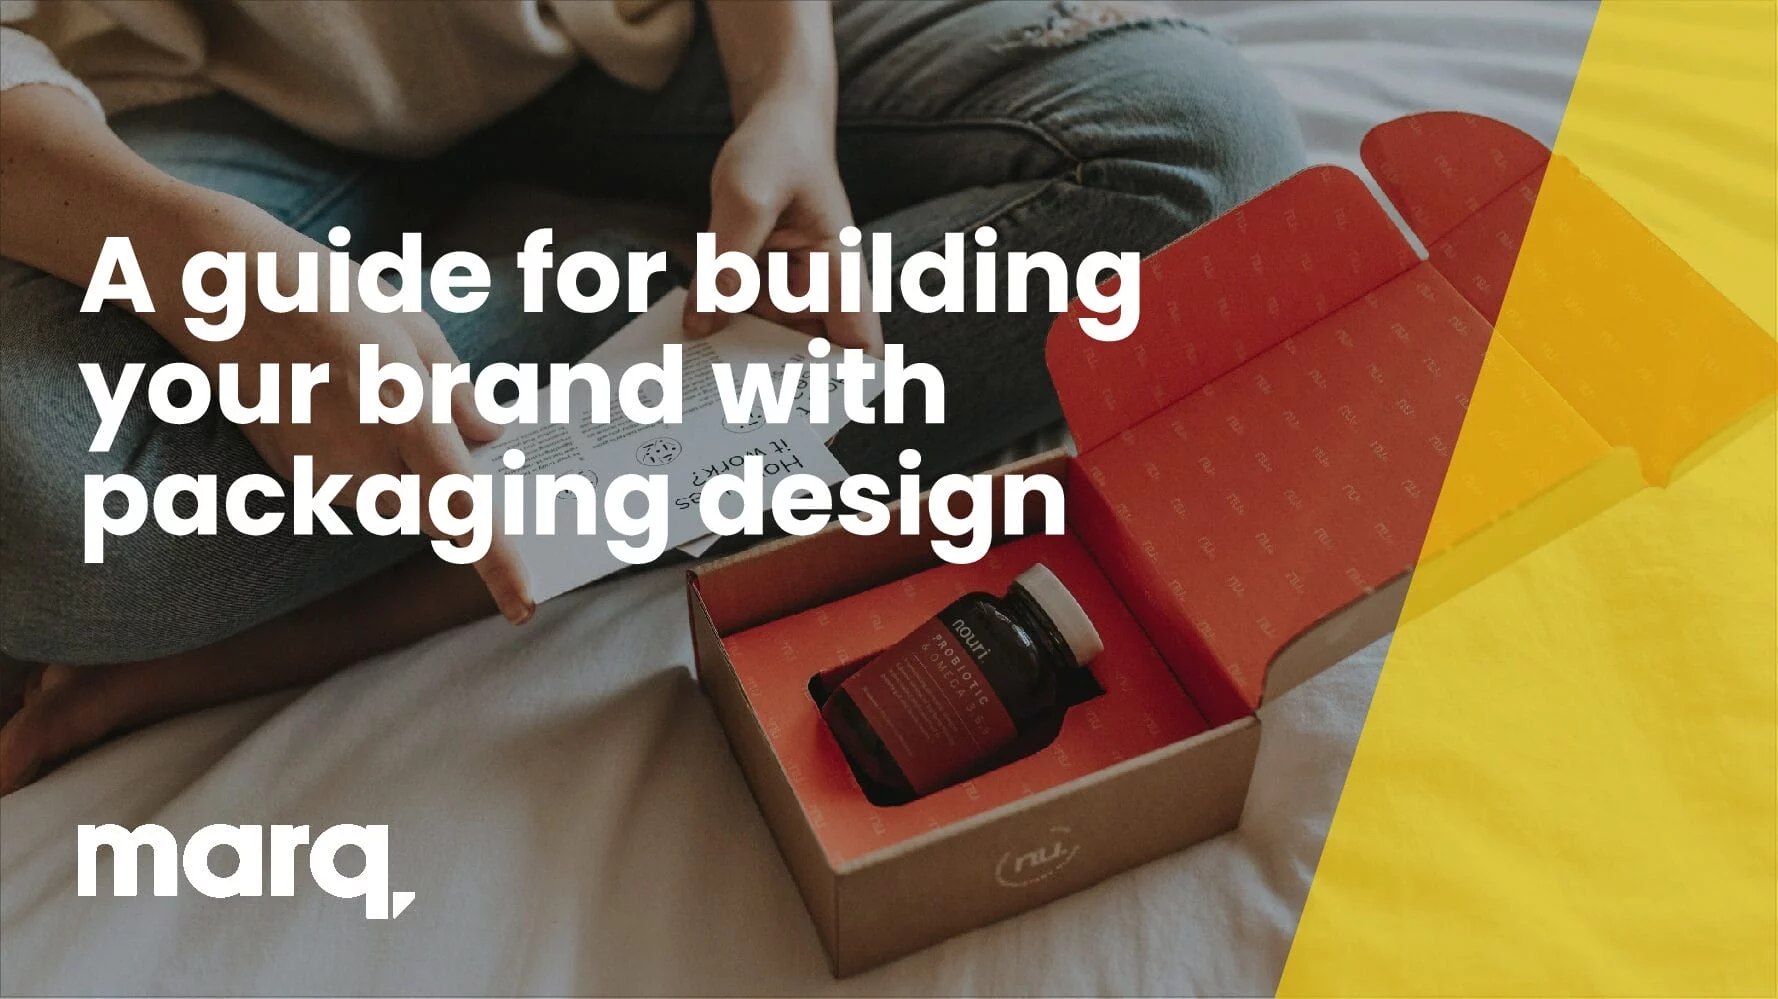 A guide for building your brand with packaging design